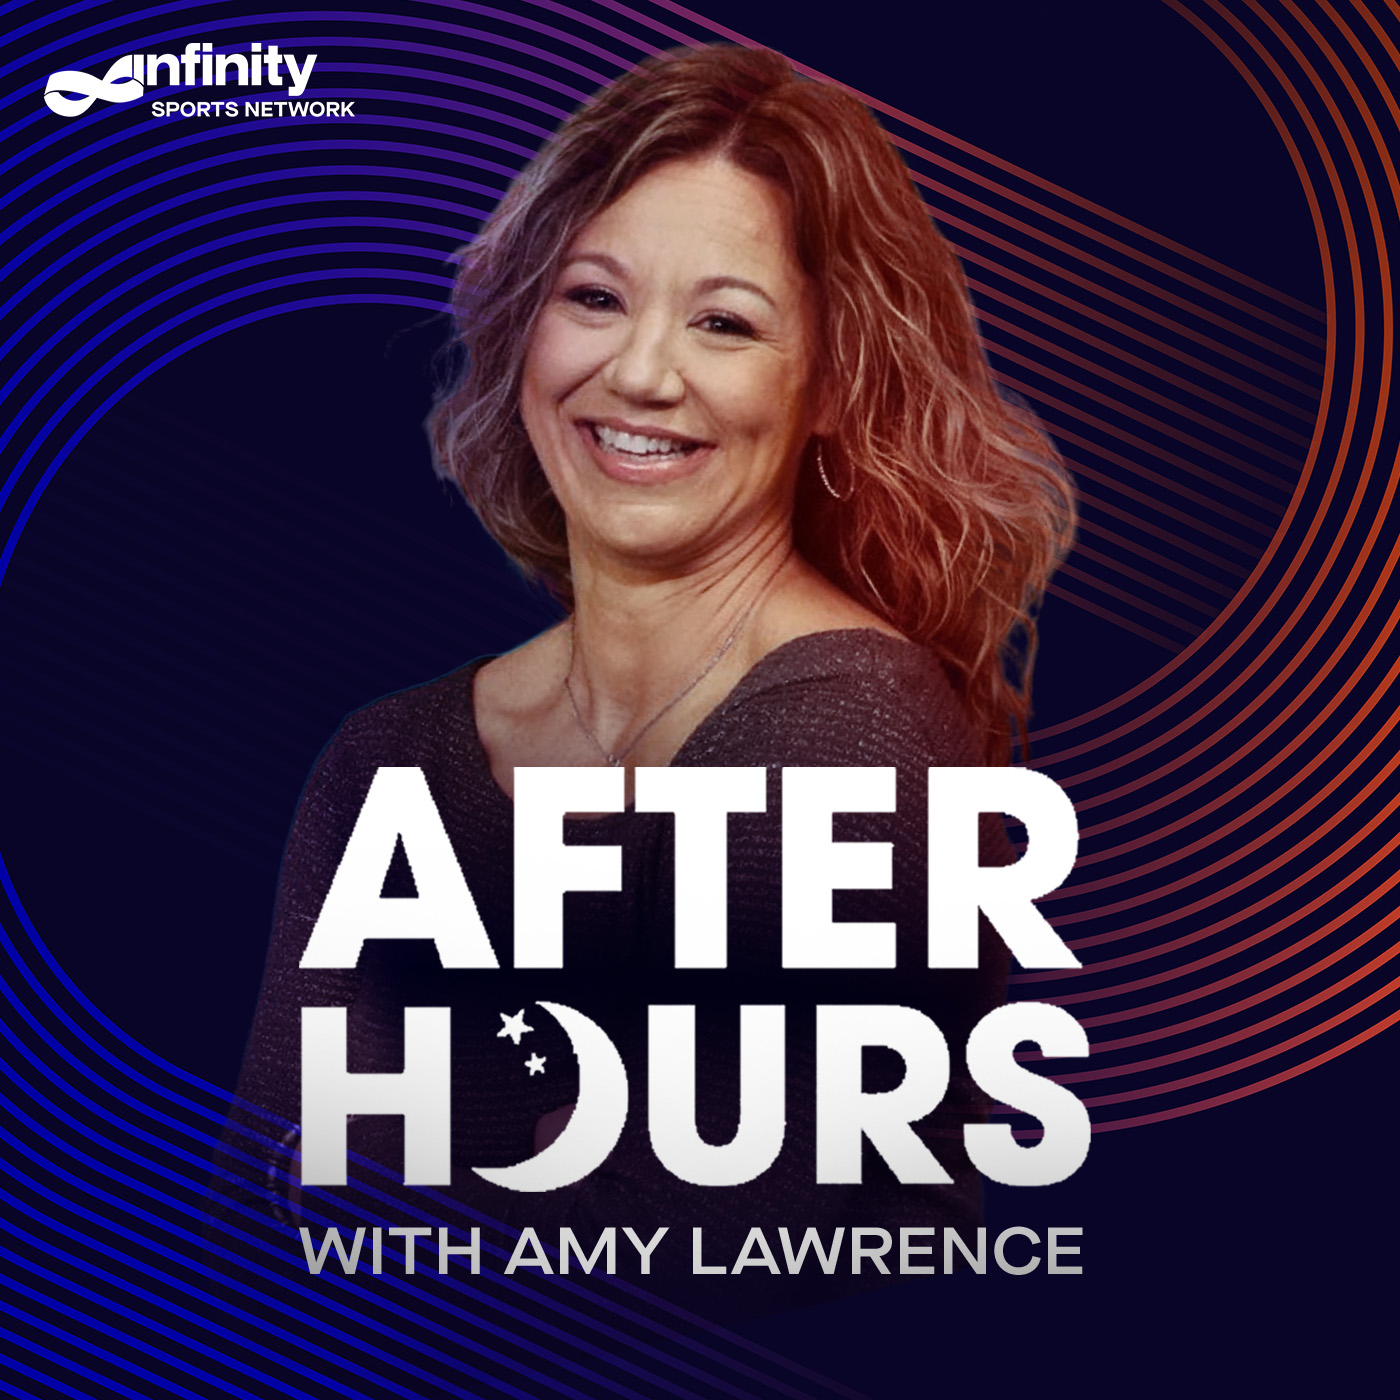 8-18-21 After Hours with Amy Lawrence PODCAST: Hour 4